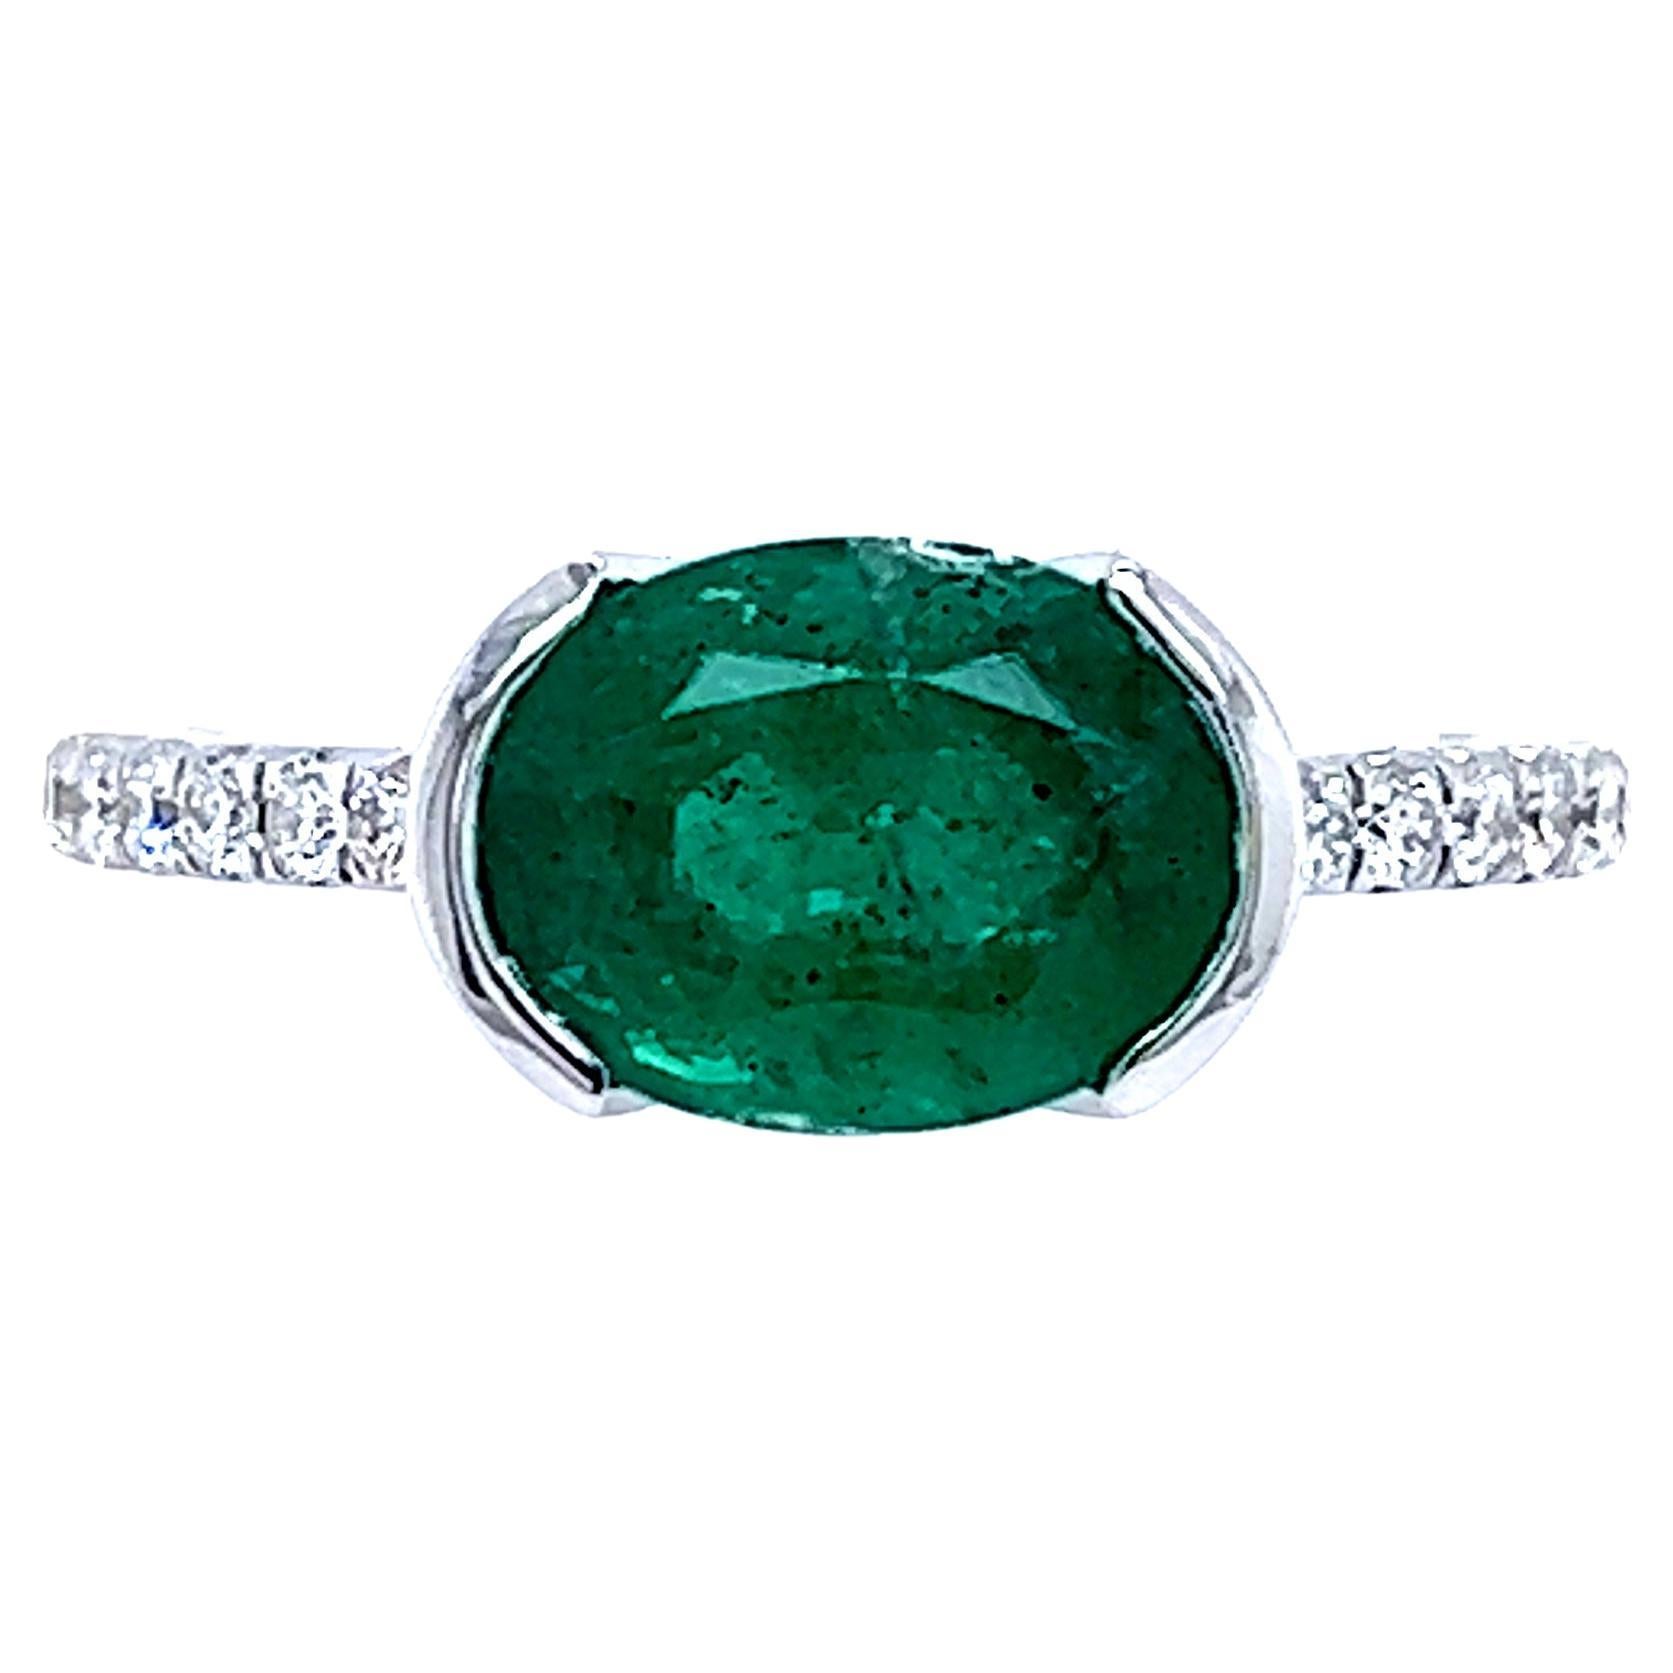 Natural Emerald Diamond Ring 6.5 14k W Gold 2.33 TCW Certified For Sale